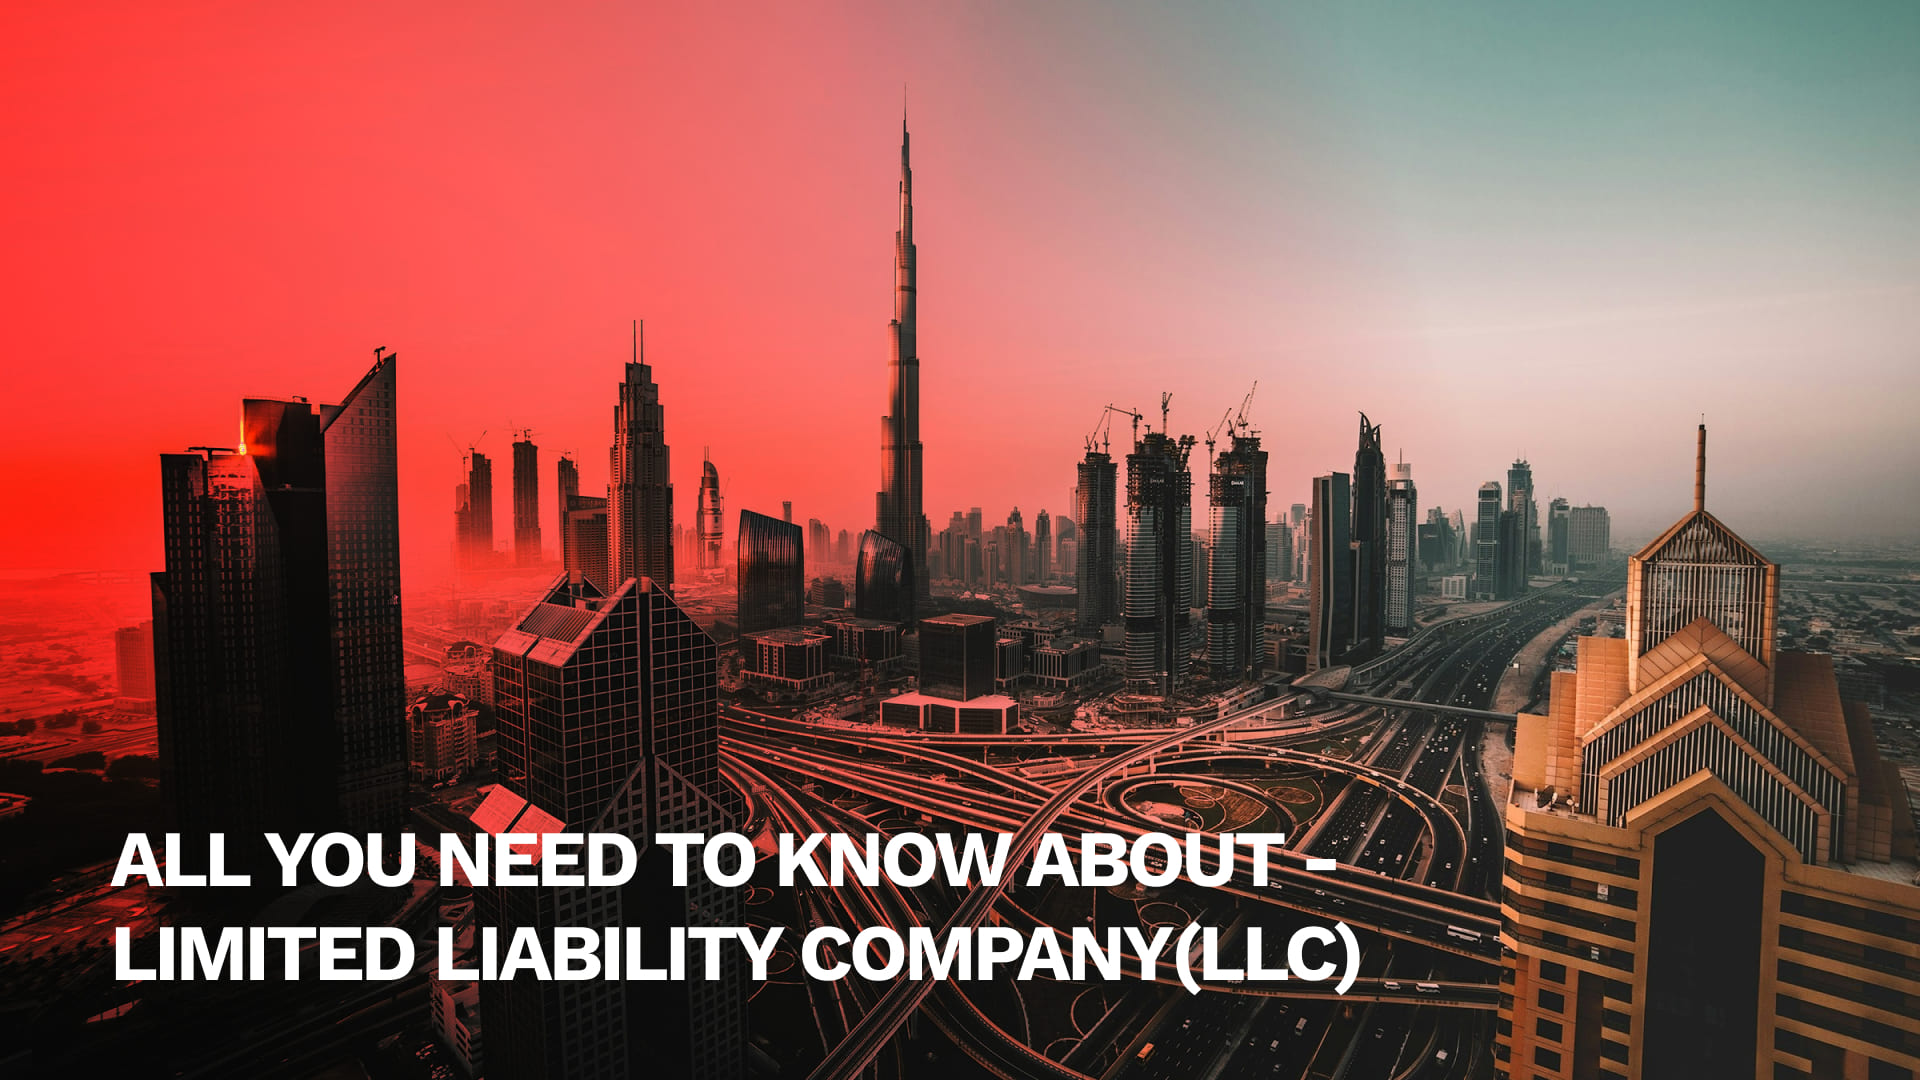 All You Need to Know About Limited Liability Company (LLC)